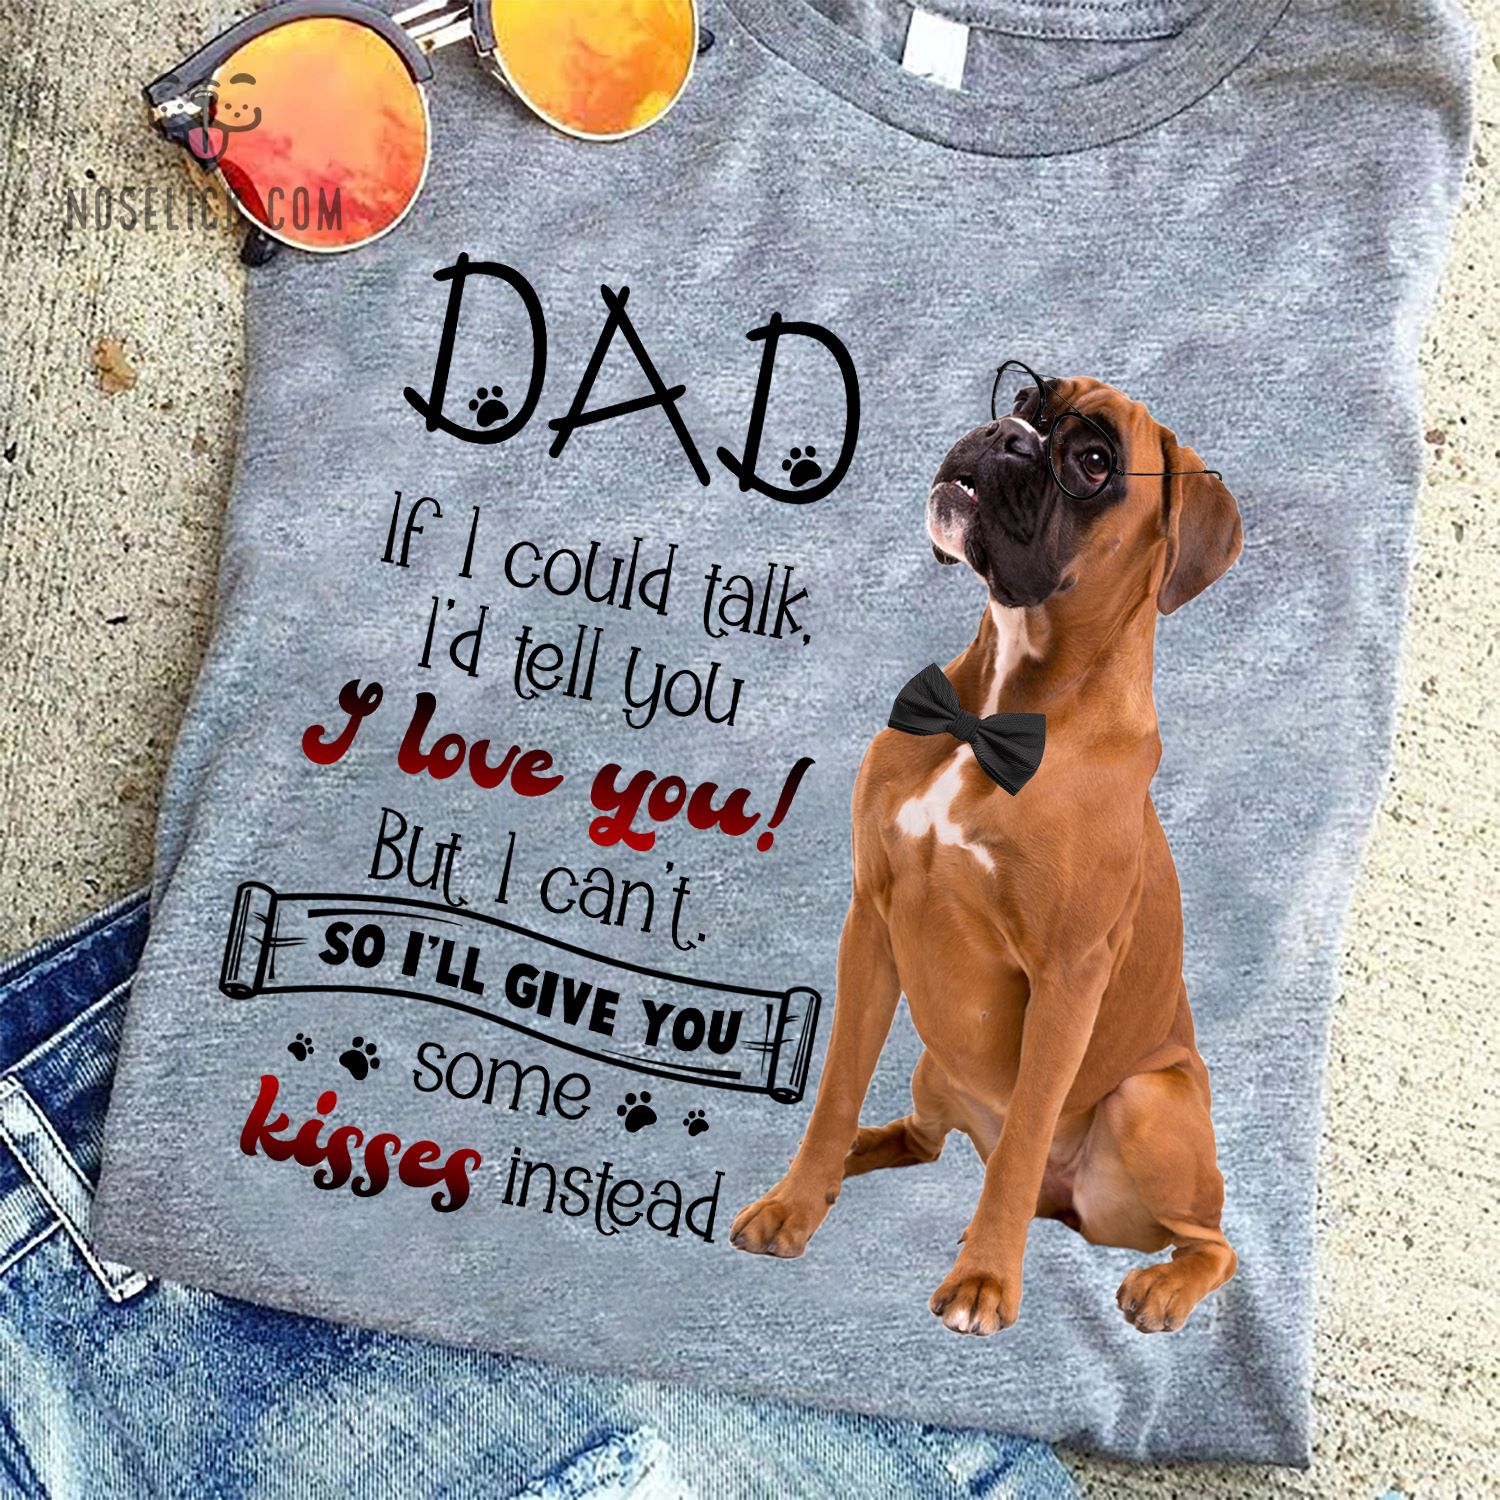 Dad if I could talk I'd tell you I love you but I can't - Boxer breed dog